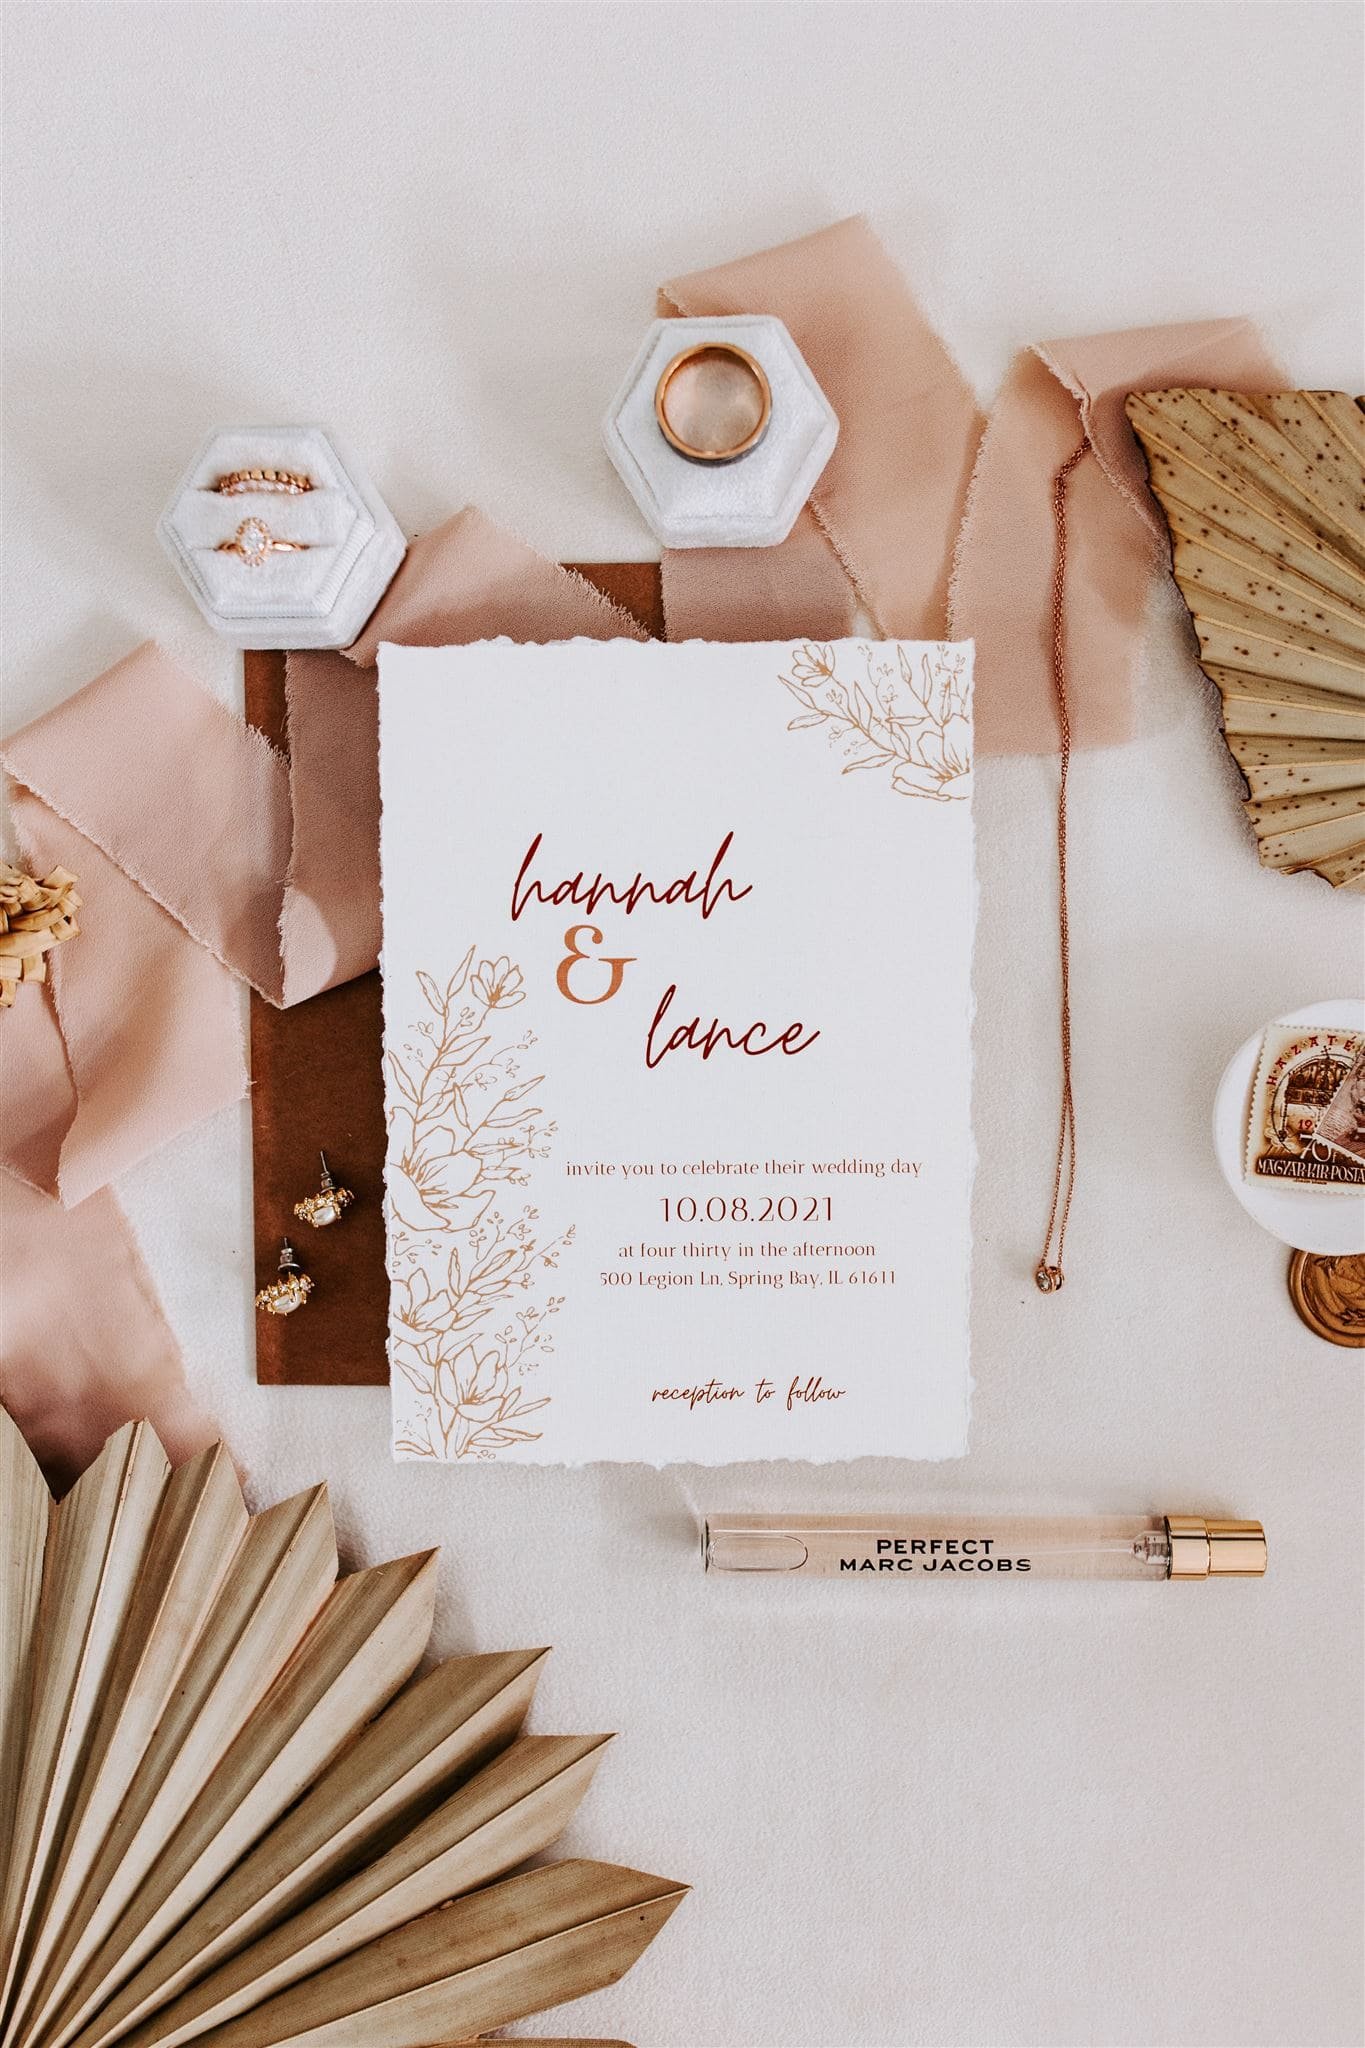  wedding recap, a flatlay of wedding stationary suite, a sample of her purfume, her jewelry, a ribbon and dried florals 